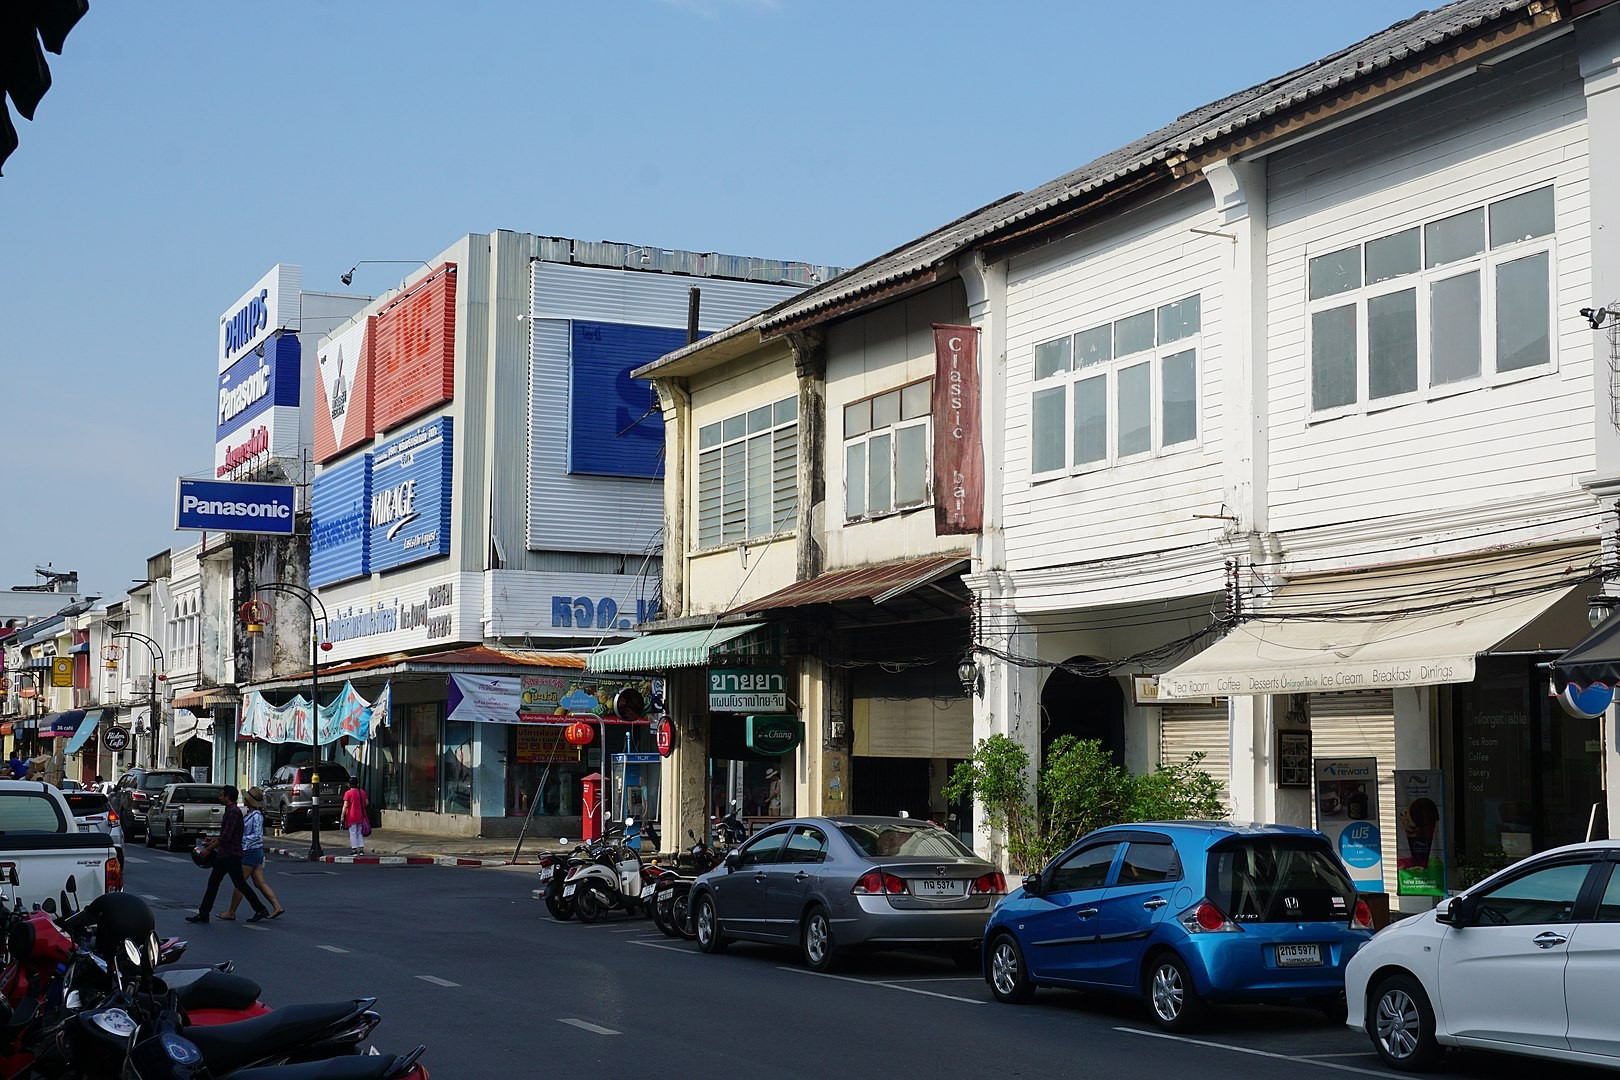 By Insights Unspoken - Yaowarad Road, Phuket Town, CC BY-SA 2.0, https://commons.wikimedia.org/w/index.php?curid=82826417